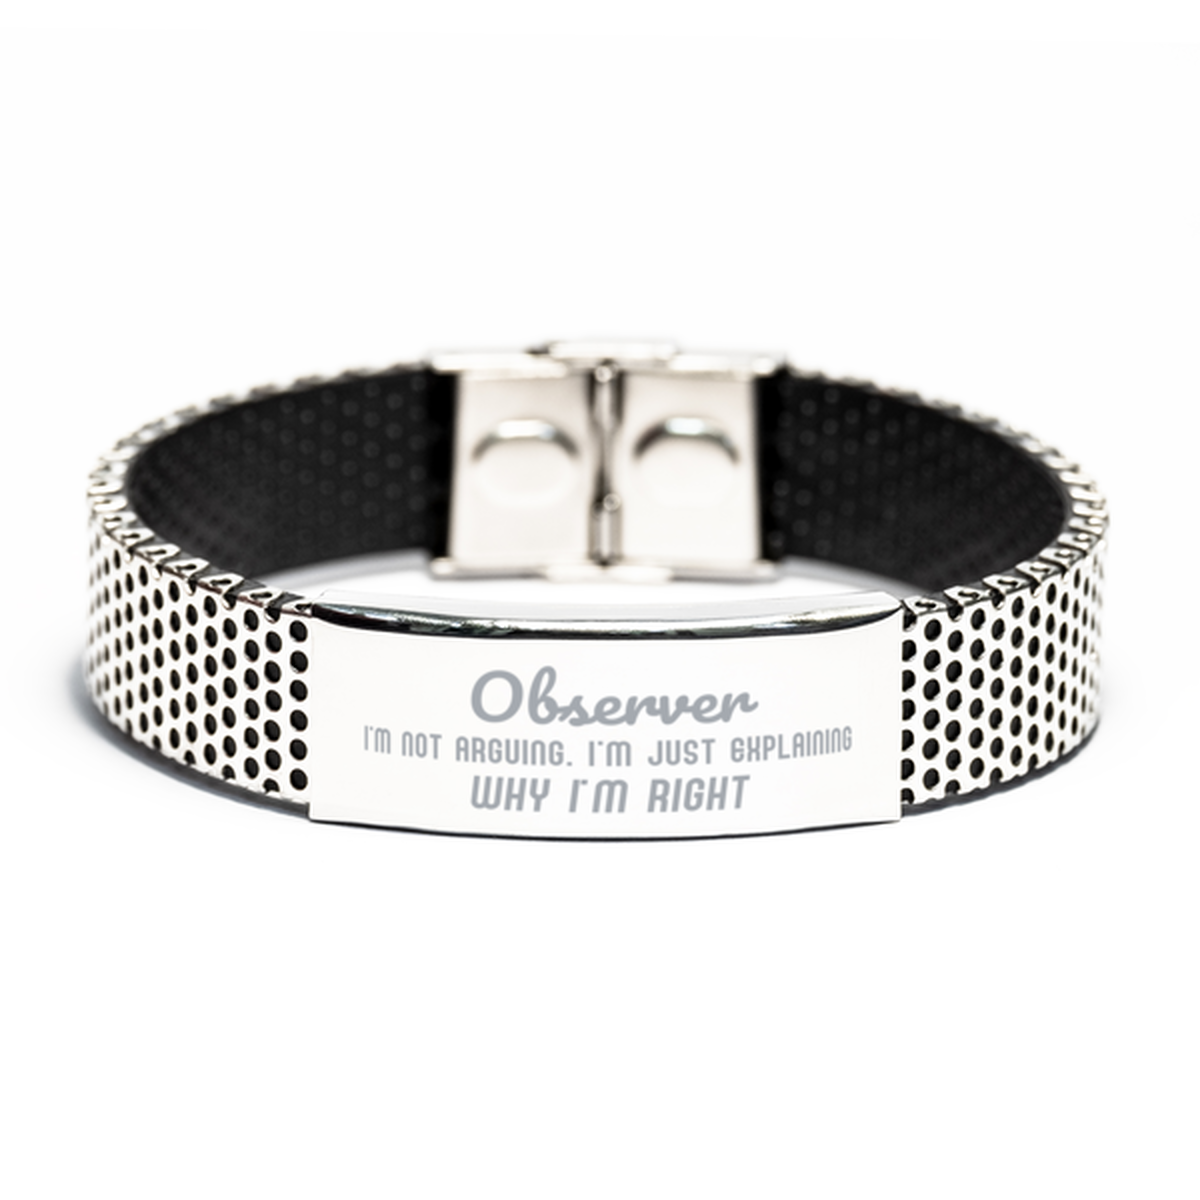 Observer I'm not Arguing. I'm Just Explaining Why I'm RIGHT Stainless Steel Bracelet, Funny Saying Quote Observer Gifts For Observer Graduation Birthday Christmas Gifts for Men Women Coworker